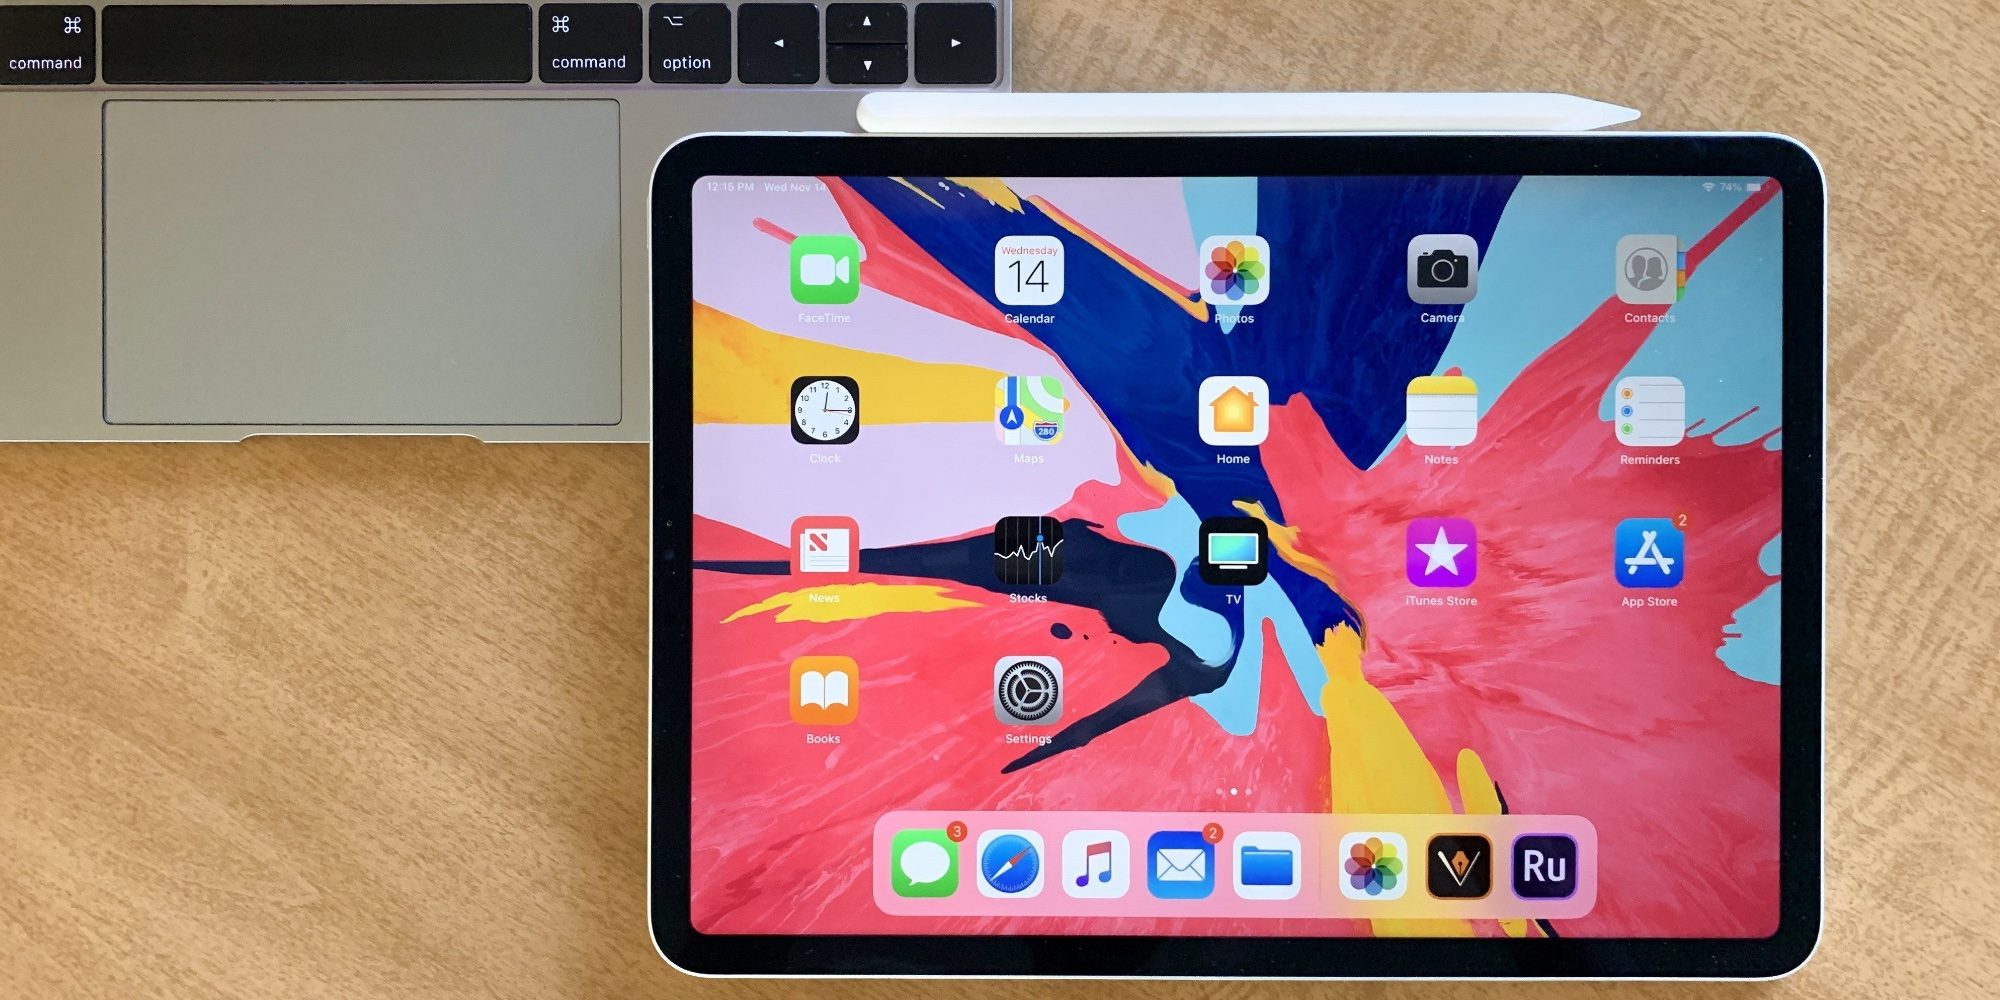 Amazon clears out 2018 iPad Pro inventory with up to $350 off original prices